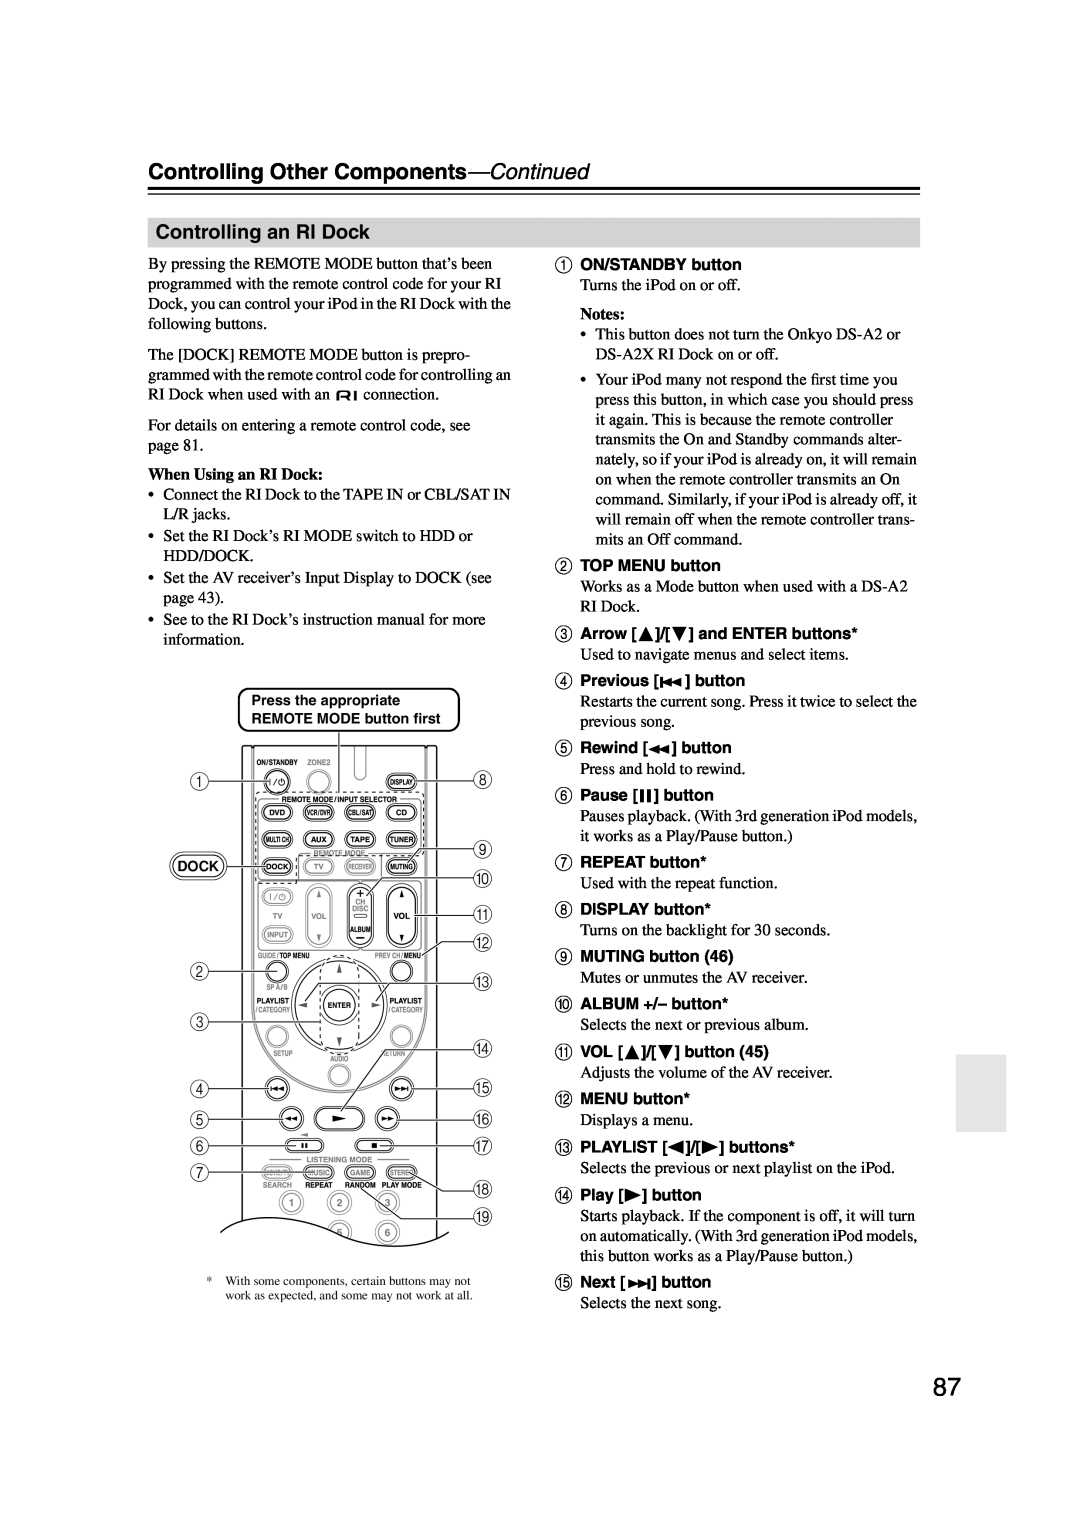 Onkyo TX-SR576, TX-SR506 instruction manual Controlling an RI Dock, Controlling Other Components-Continued 